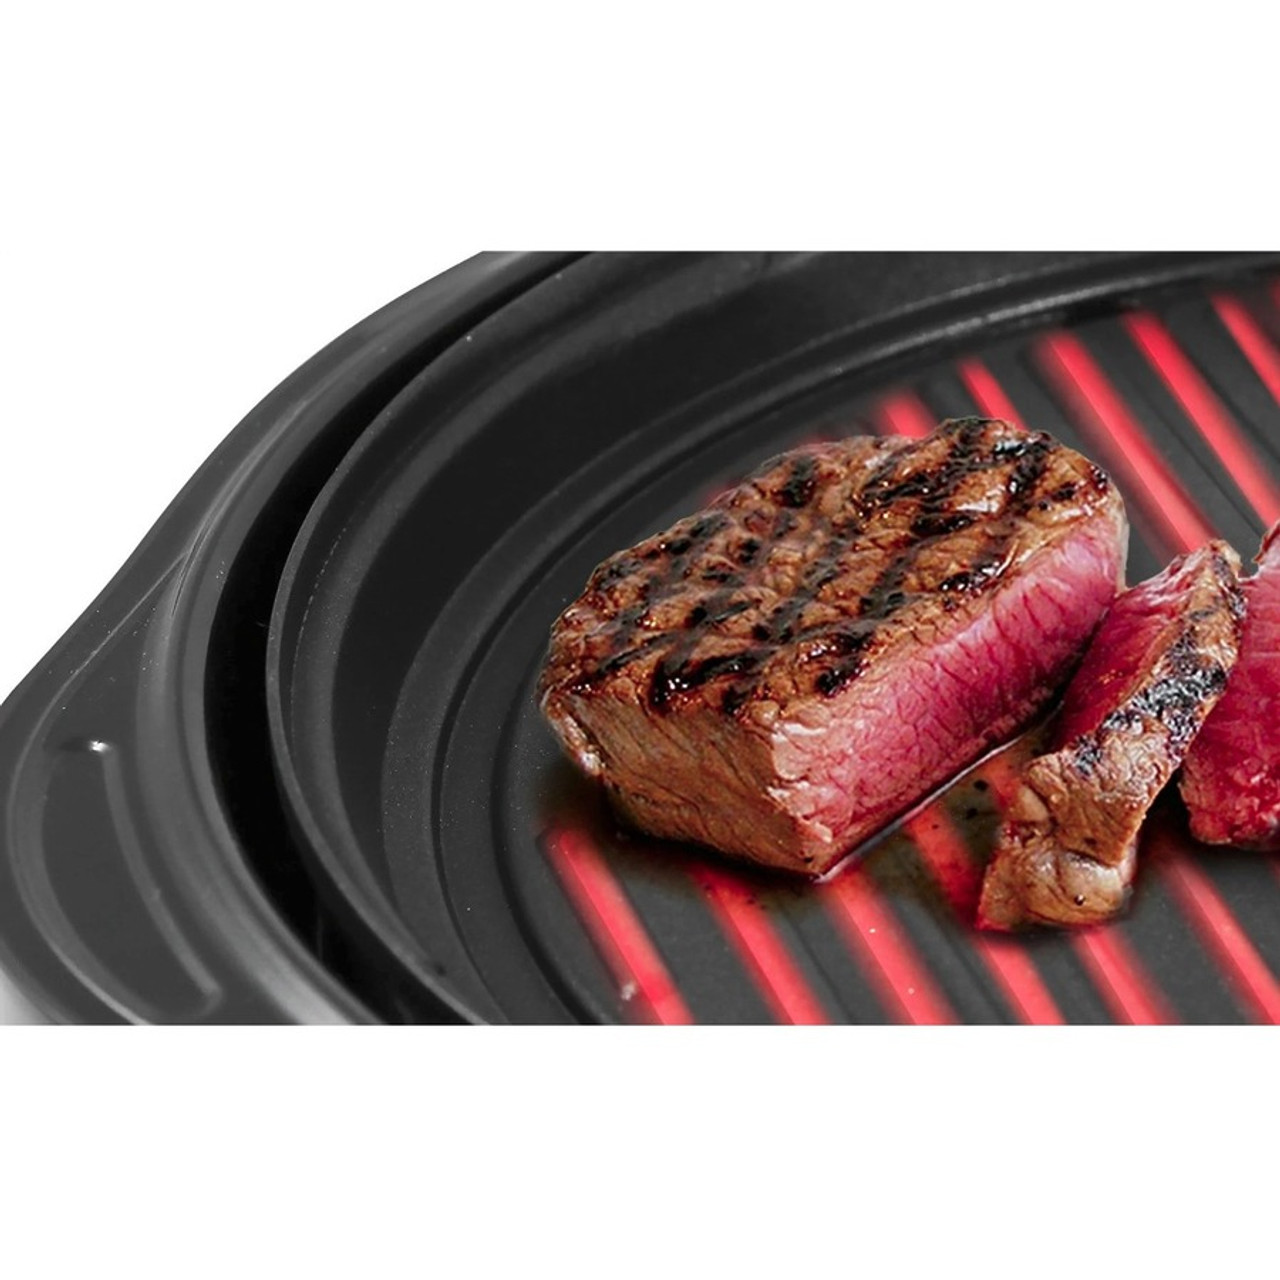 Elite Gourmet EMG1100 Electric Indoor Nonstick Grill, Dishwasher Safe, Cool  Touch, Fast Heat Up Ideal Low-Fat Meals, Includes Tempered Glass Lid, 11